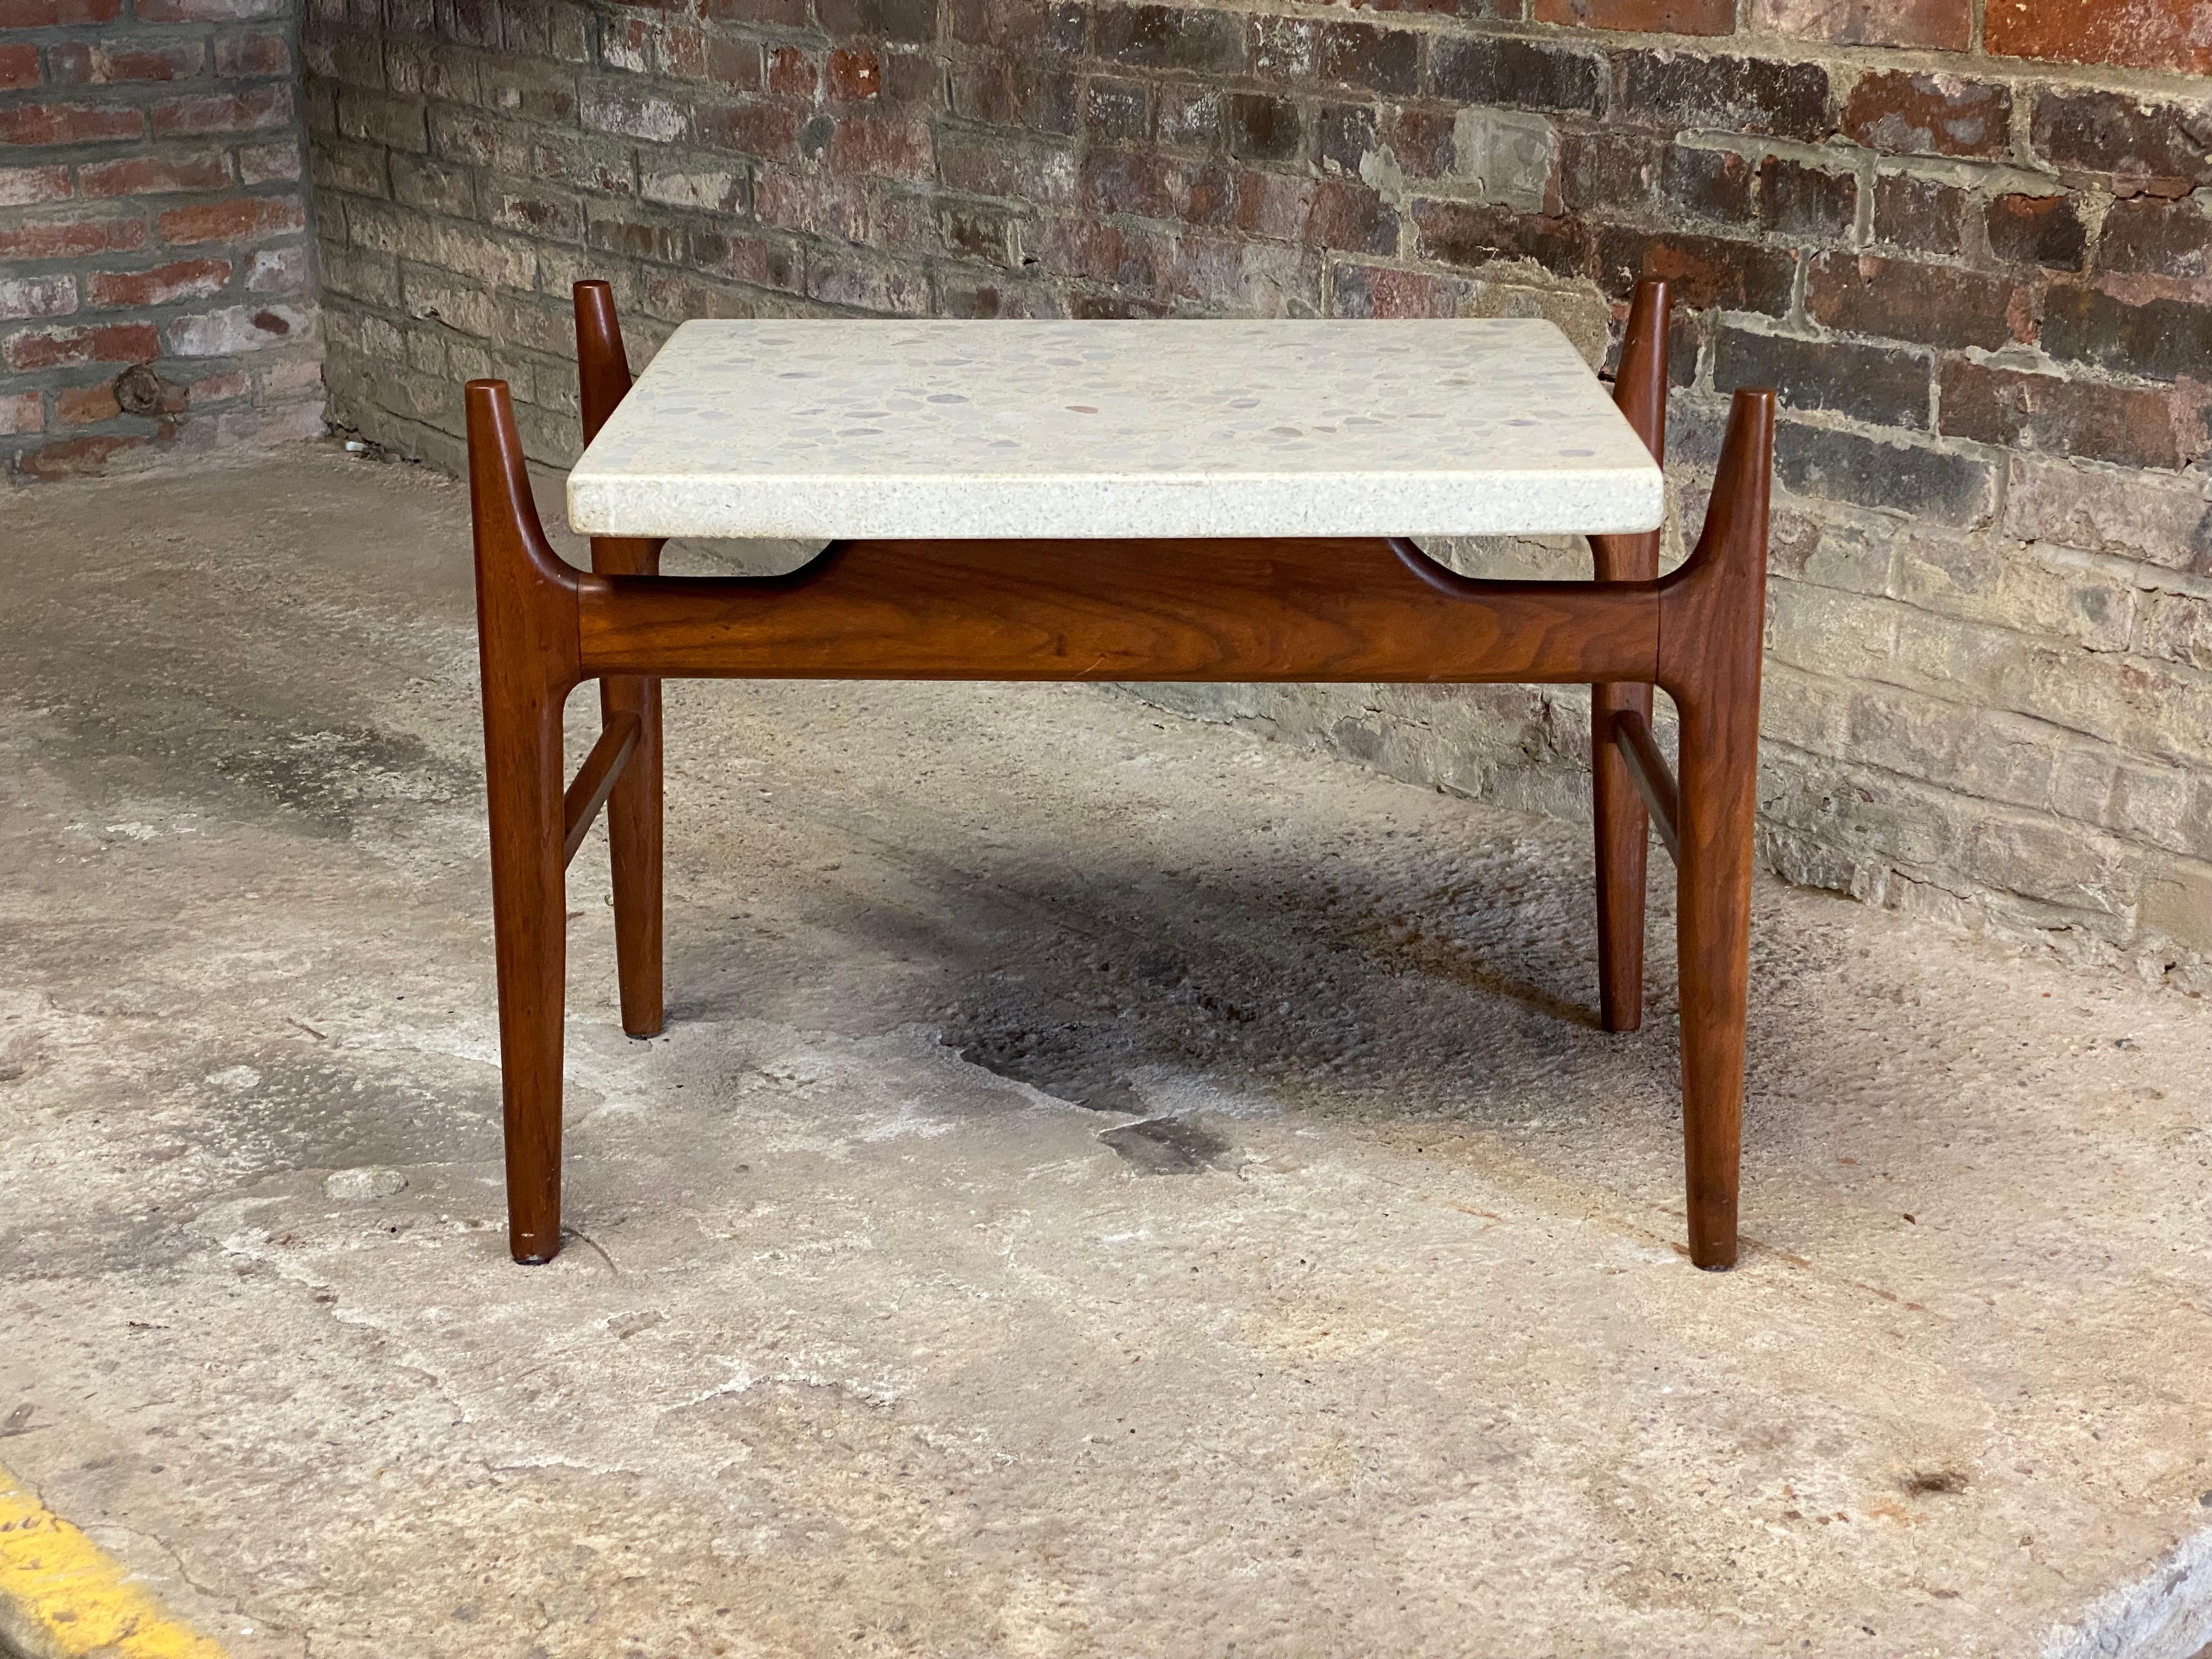 Solid oiled walnut with a rectangular thick terrazzo top. Tapered and extended legs that come up and over and away from  the terrazzo top to give it a floating appearance. Circa 1960.

Good overall condition with no major visible chips, cracks or